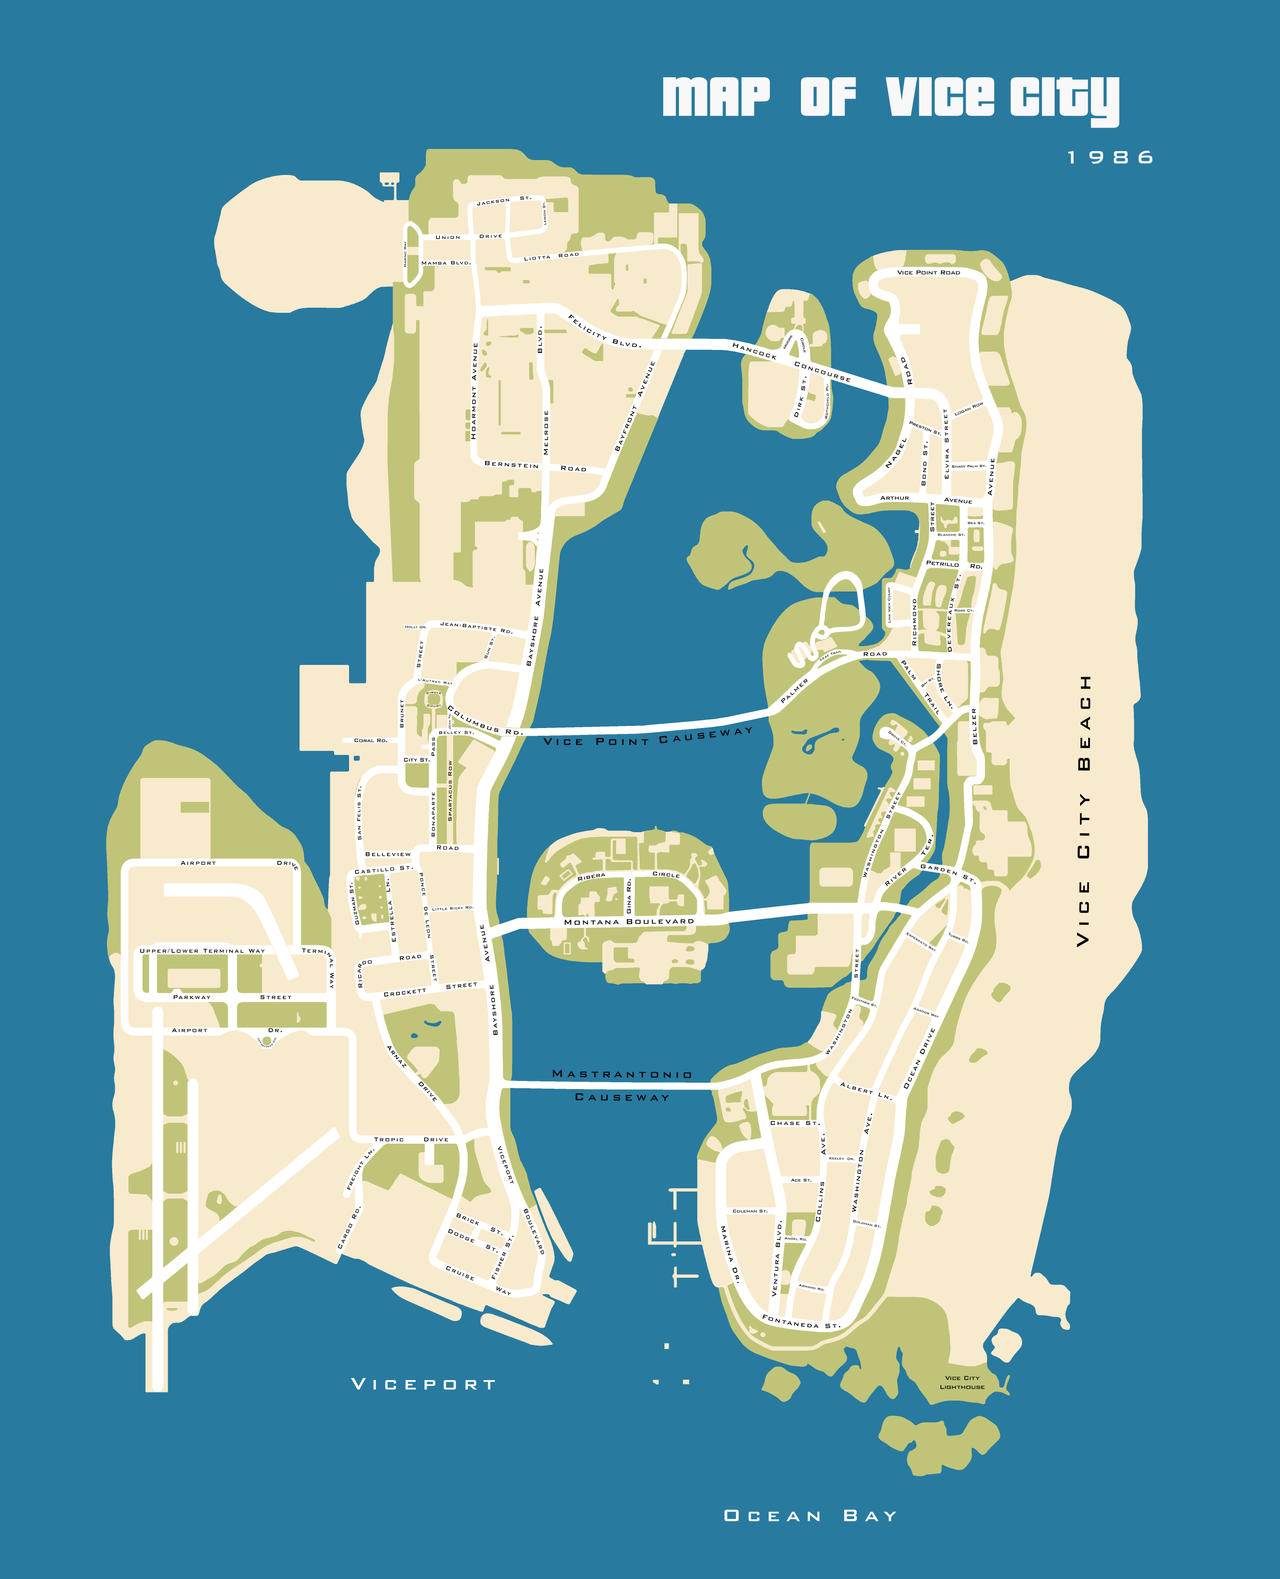 Map of Vice City with street names by roset03 on DeviantArt